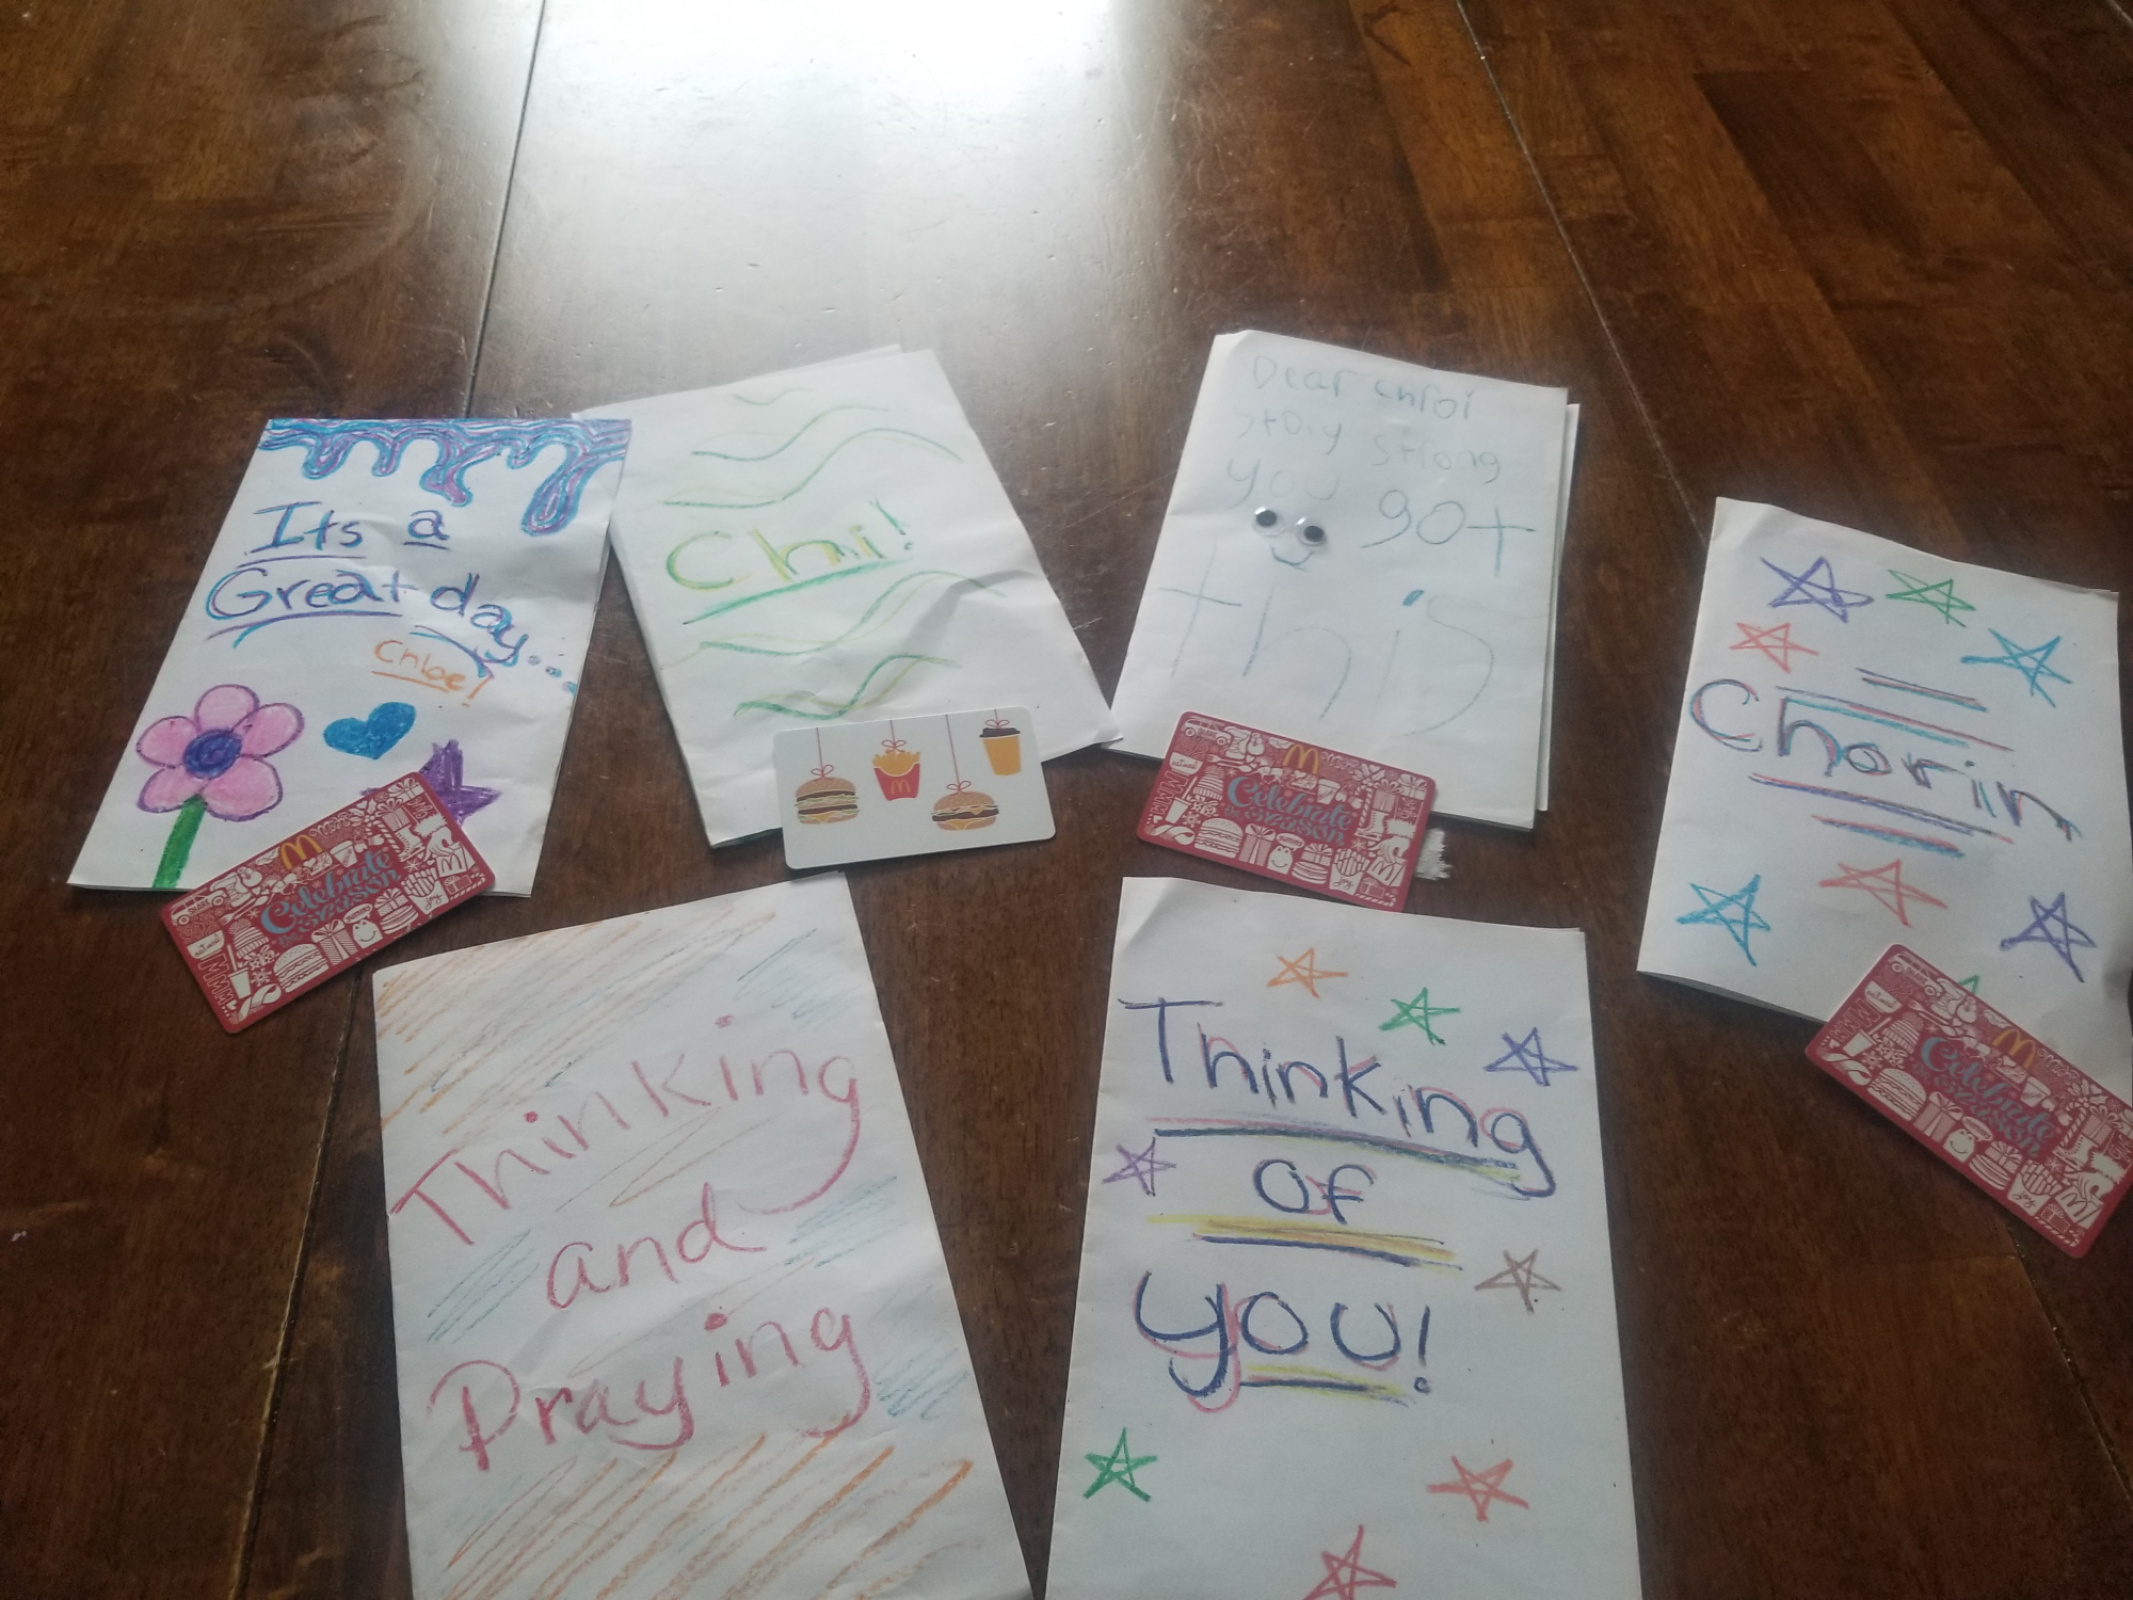 Thank you to the Thompson family for the gift cards and the beautiful notes for each of the kids. 